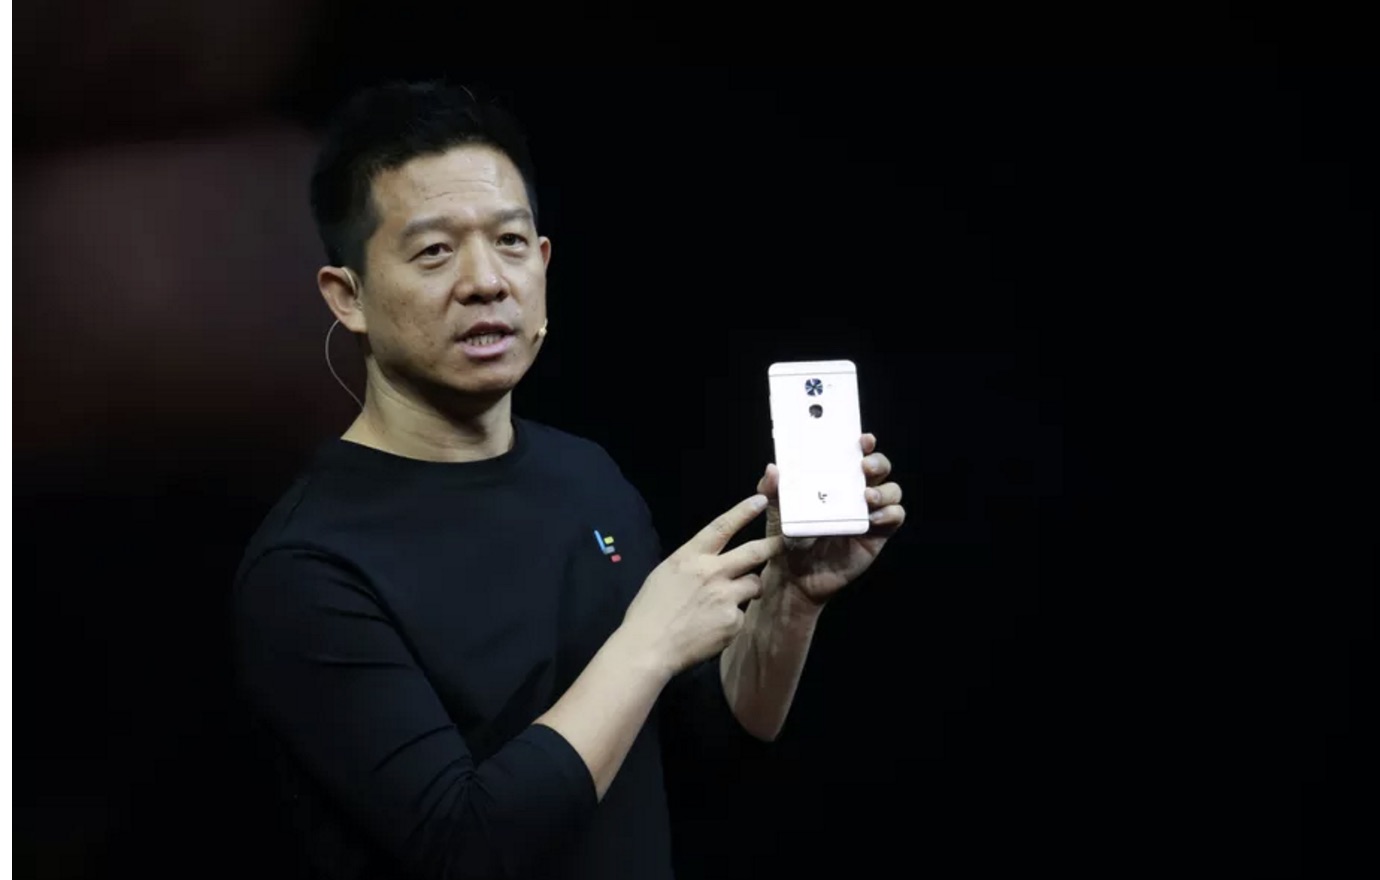 Jia on stage presenting a new Iphone